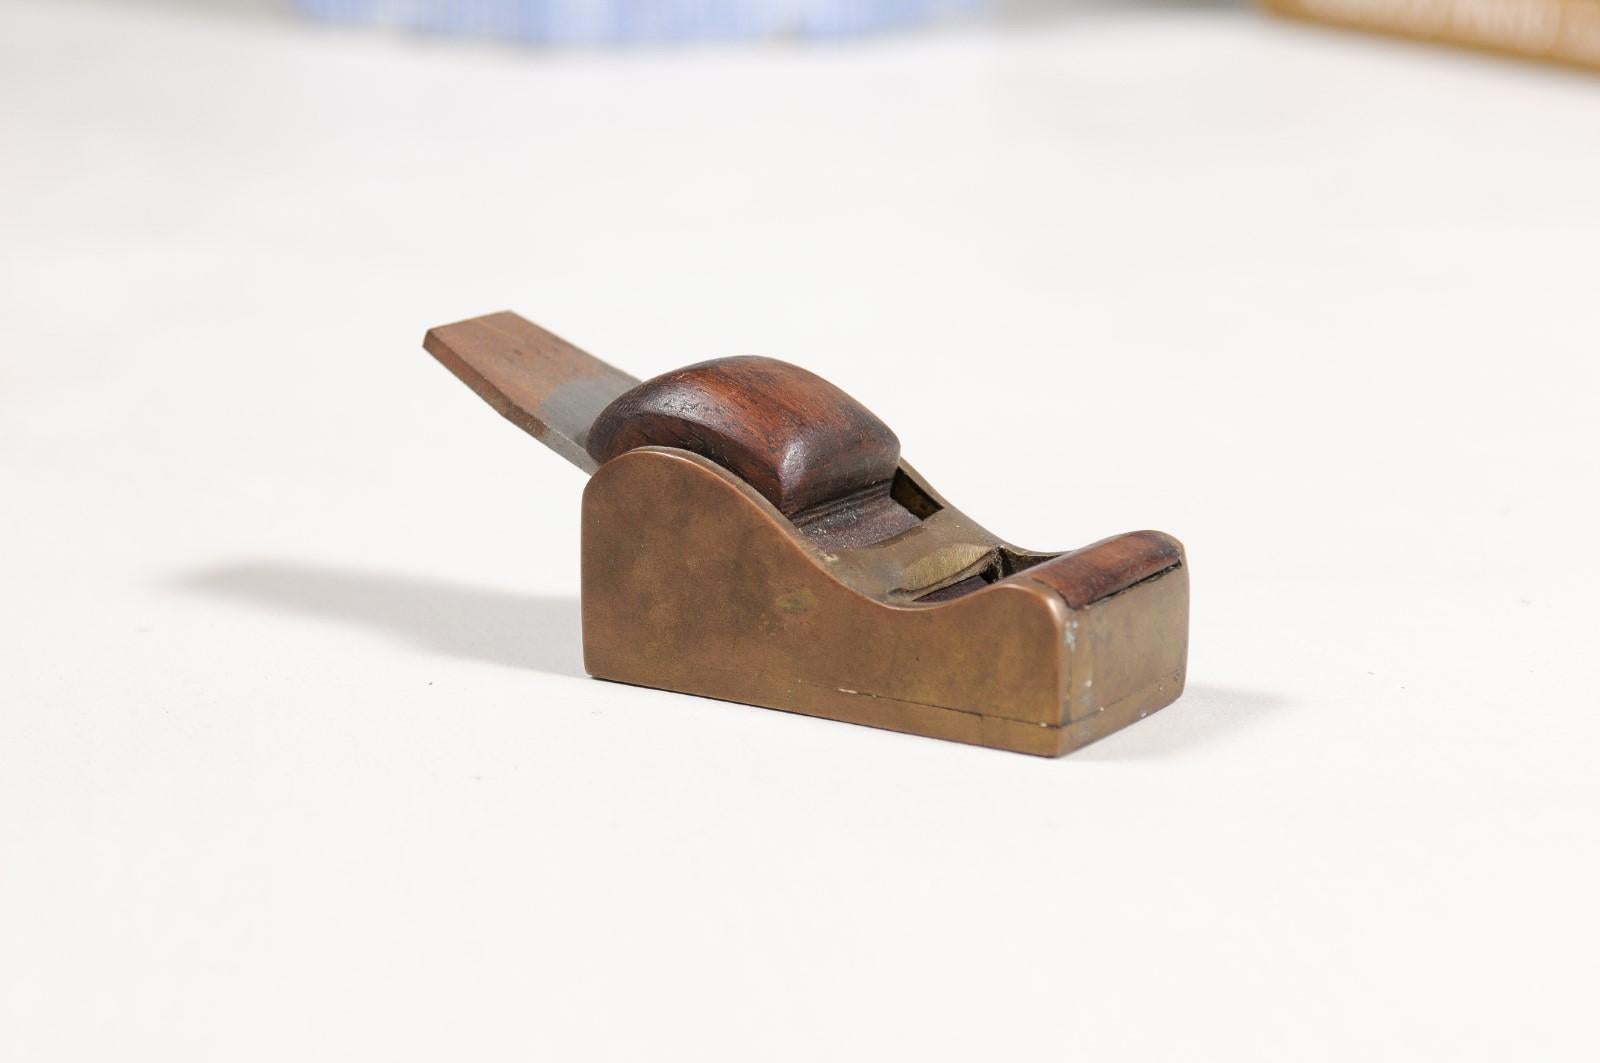 An English Victorian period carpenter's woodworking hand planer from the late 19th century, with brass structure, wood handle and metal blade. Created in England during the later years of Queen Victoria's reign in the 19th century, this woodworking